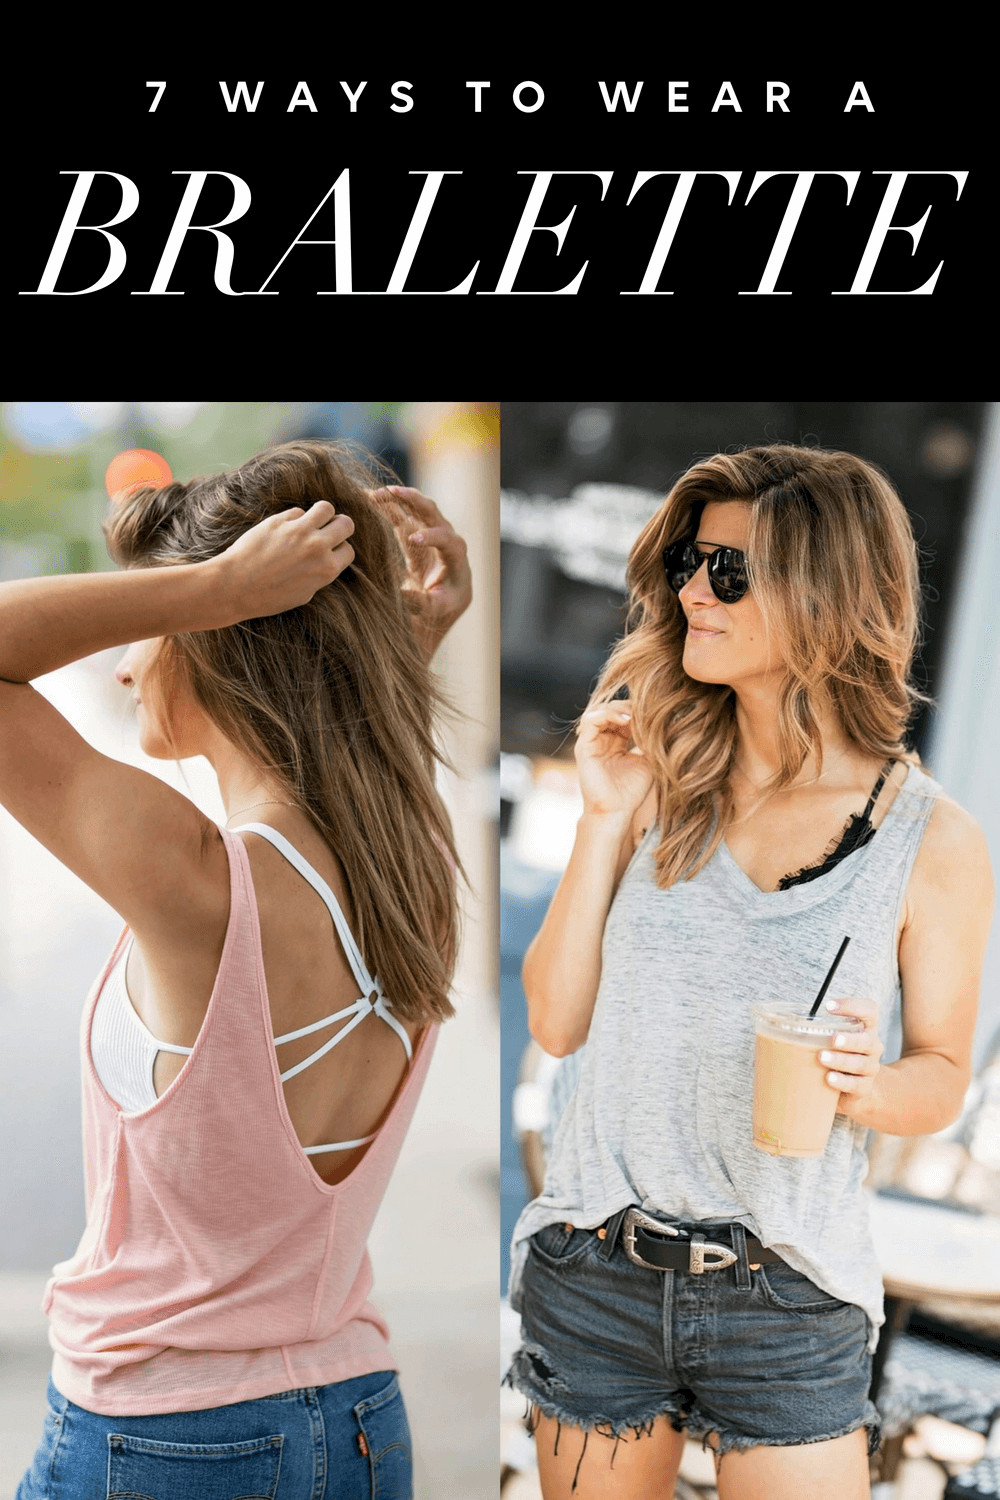 How To Wear Bralettes: Outfit Ideas